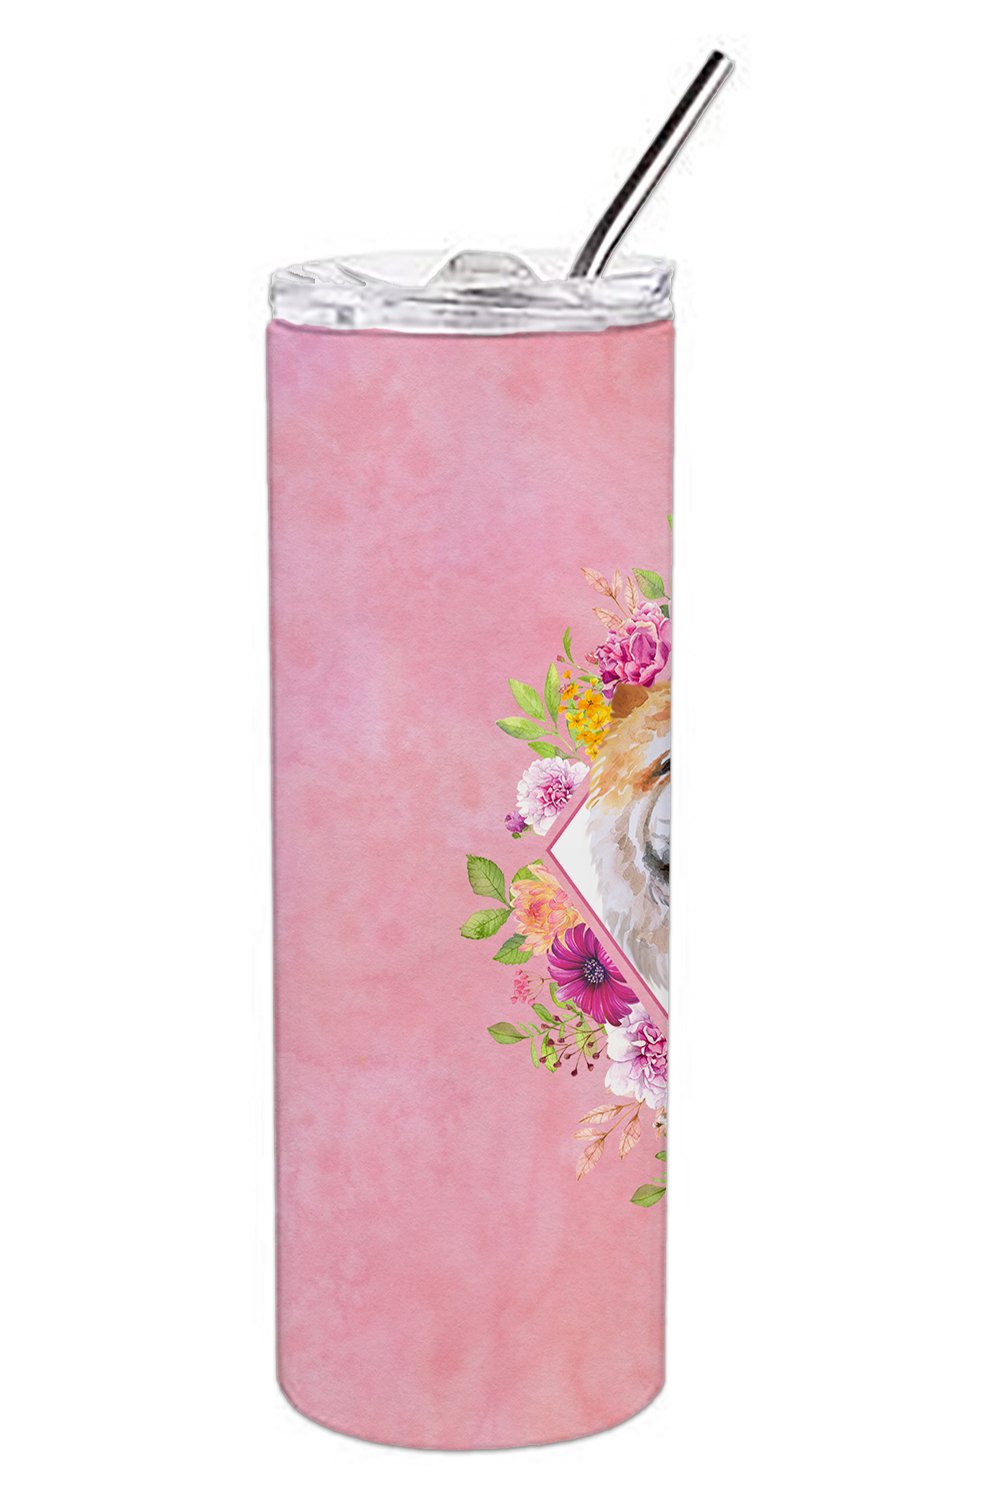 Chow Chow #2 Pink Flowers Double Walled Stainless Steel 20 oz Skinny Tumbler CK4132TBL20 by Caroline's Treasures